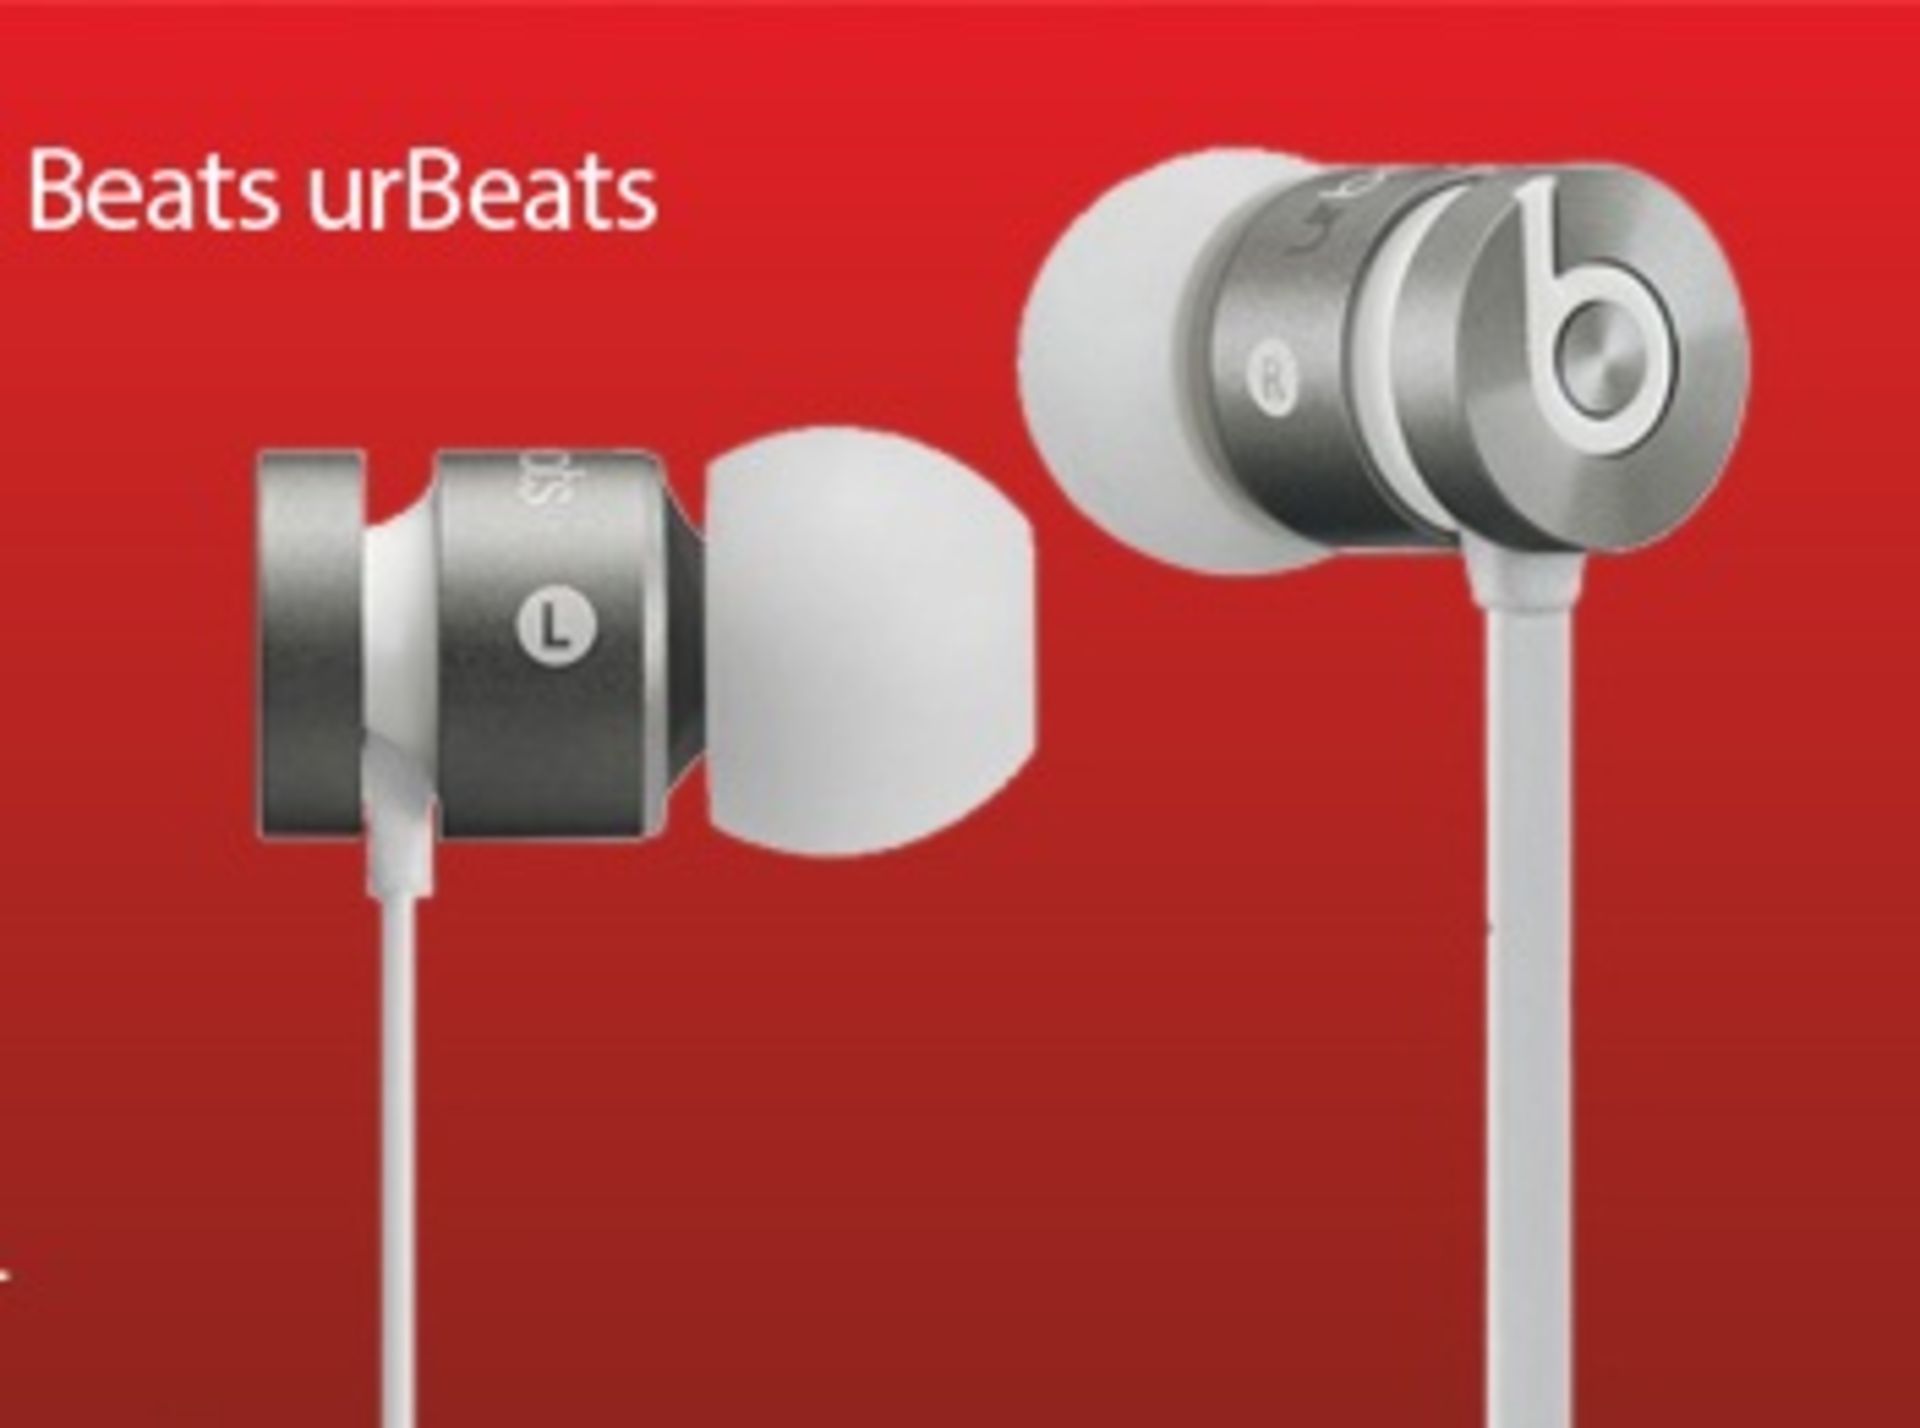 V Brand New Beats By Dr Dre urBeats Earphones - Silver - These are boxed and sealed - With Apple - Image 2 of 2